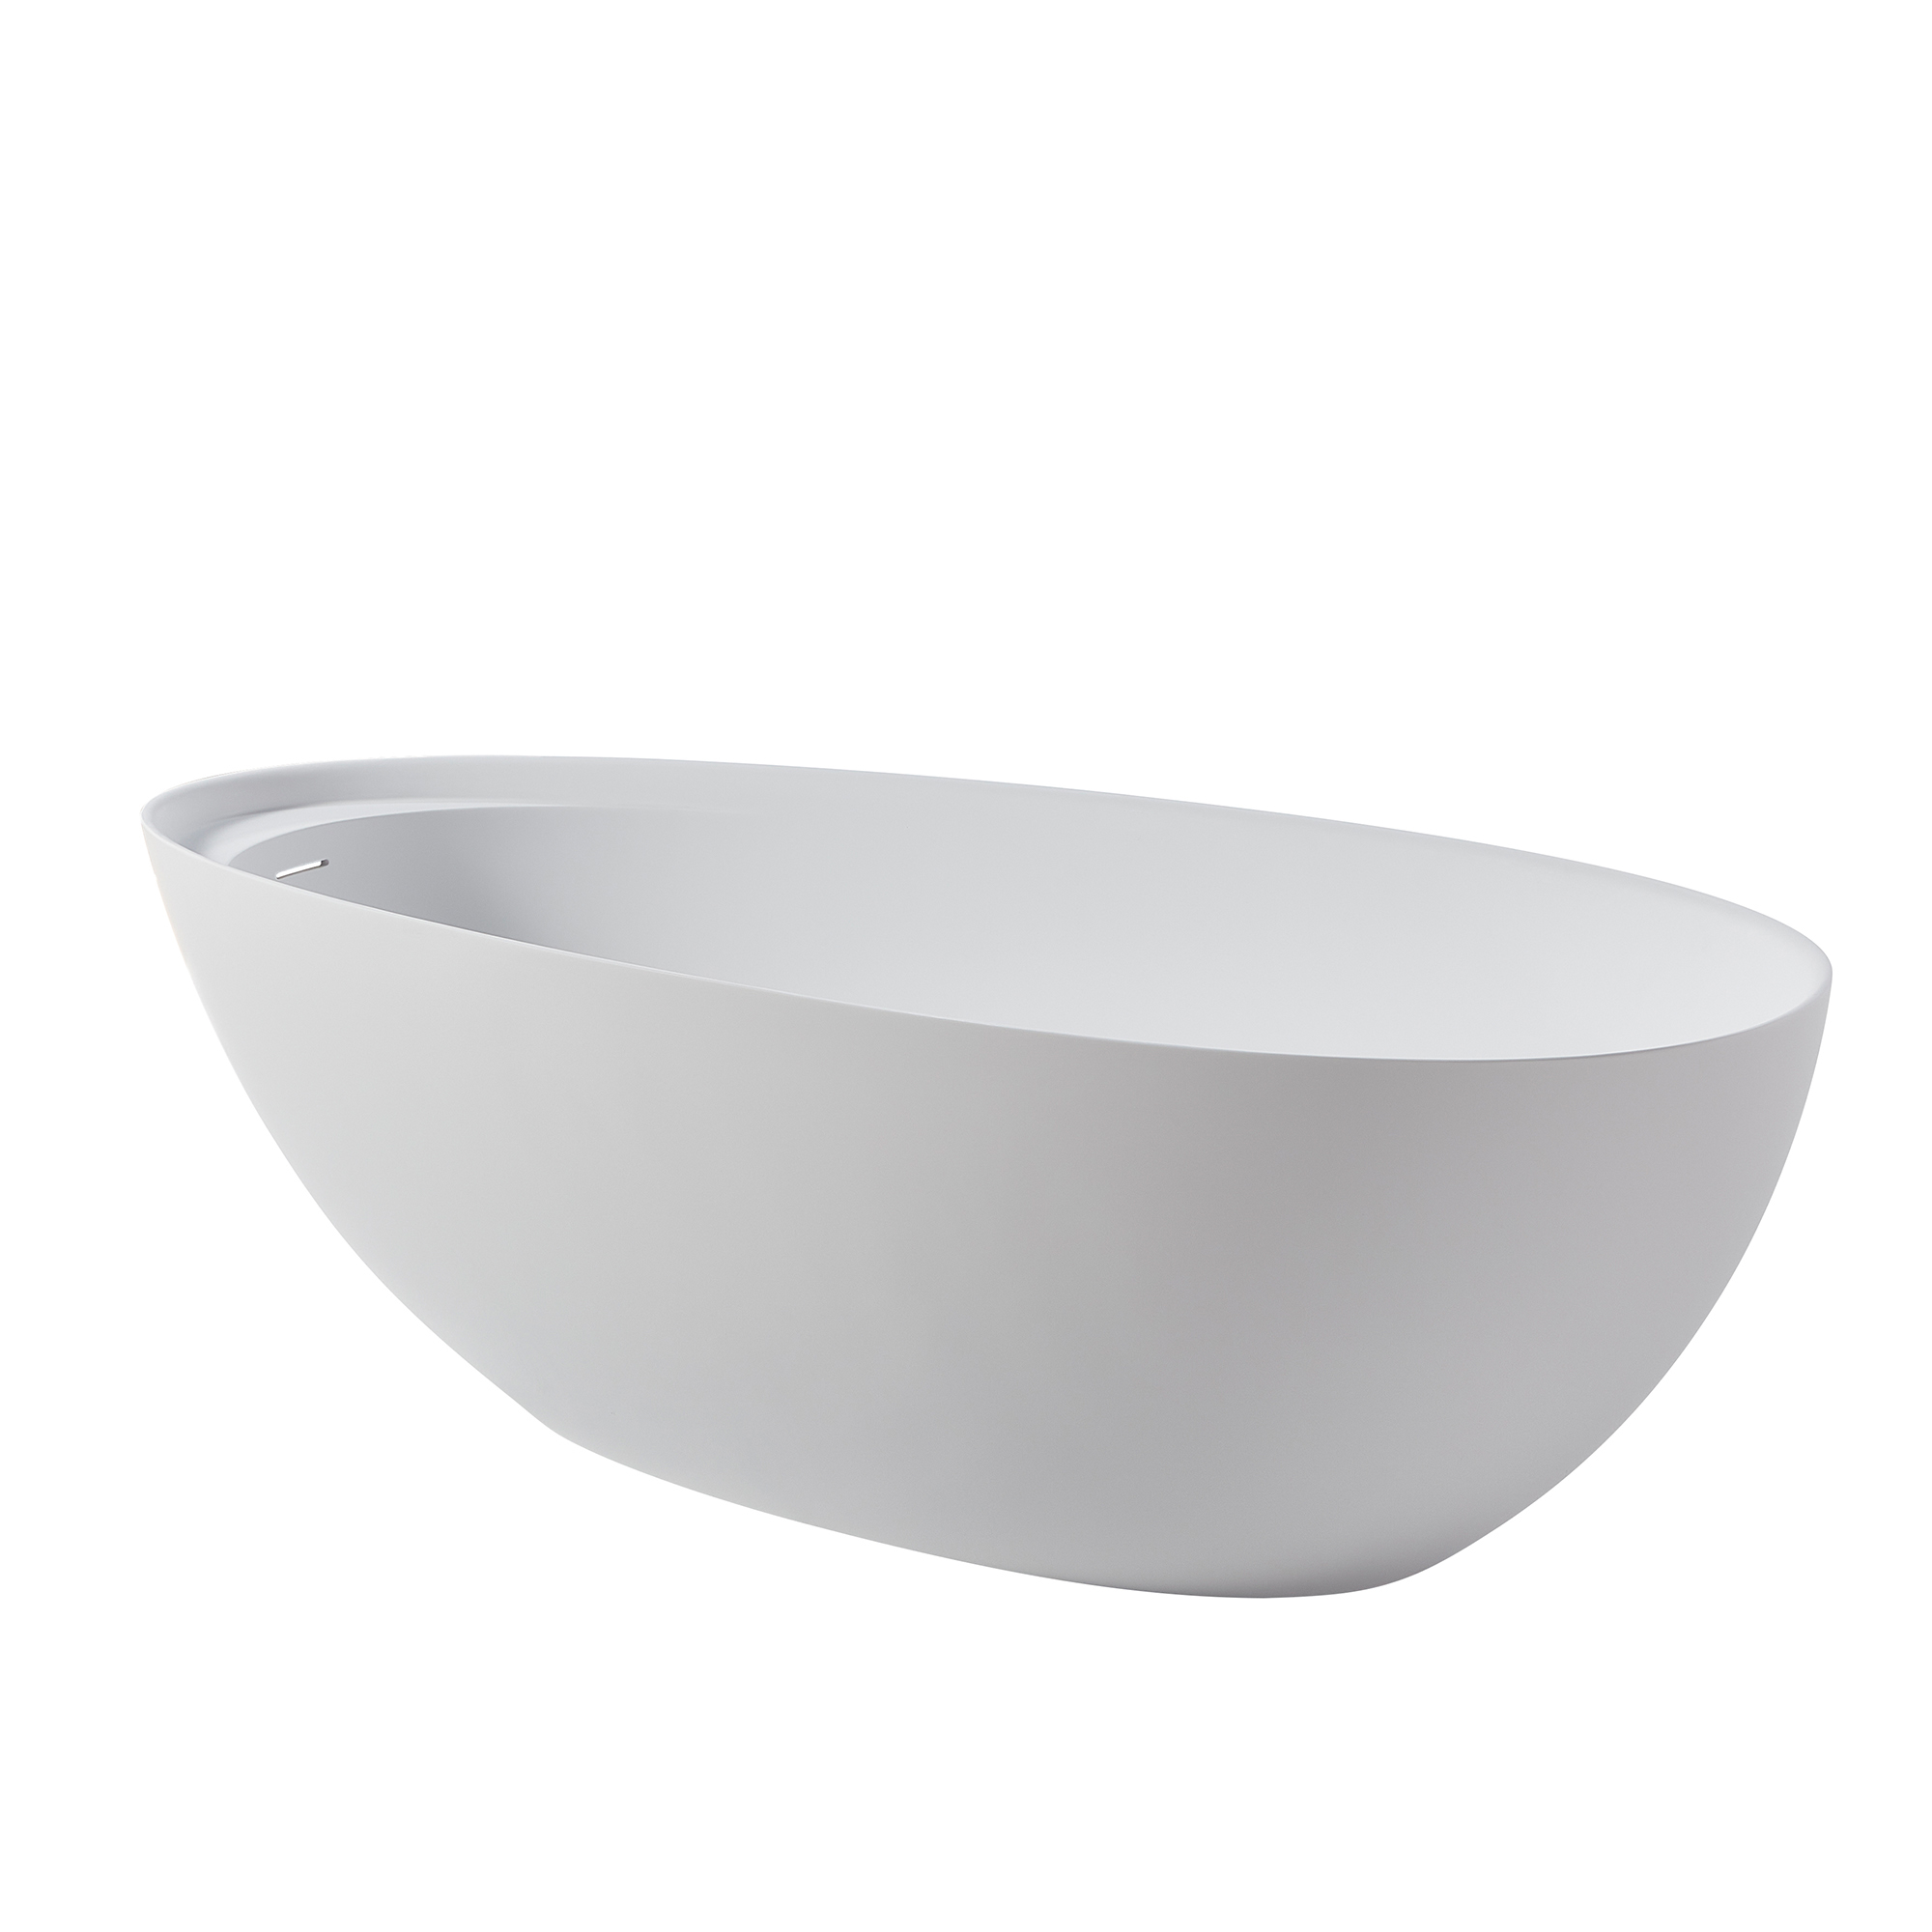 CASAINC 67" Solid Surface Freestanding Bathtub,Egg Shell Shaped Stone Resin Freestanding Tubs with Overflow and  Drain, Matte Black, Matte Grey, Matte White